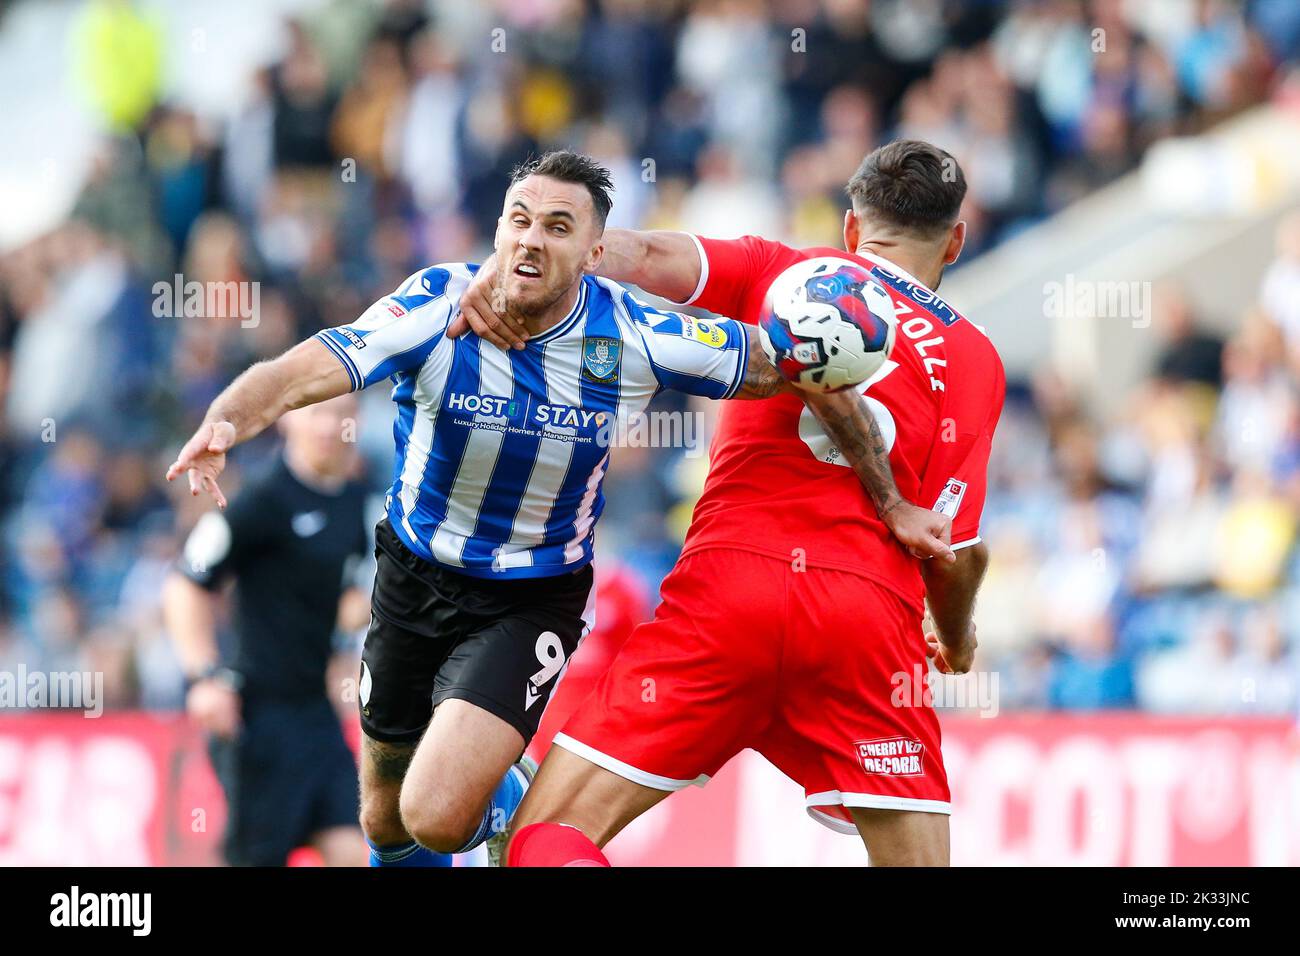 Lee Gregory #9 of Sheffield Wednesday and Ryan Tafazolli #6 of Wycombe Wanderers during the Sky Bet League 1 match Sheffield Wednesday vs Wycombe Wanderers at Hillsborough, Sheffield, United Kingdom, 24th September 2022  (Photo by Ben Early/News Images) Stock Photo